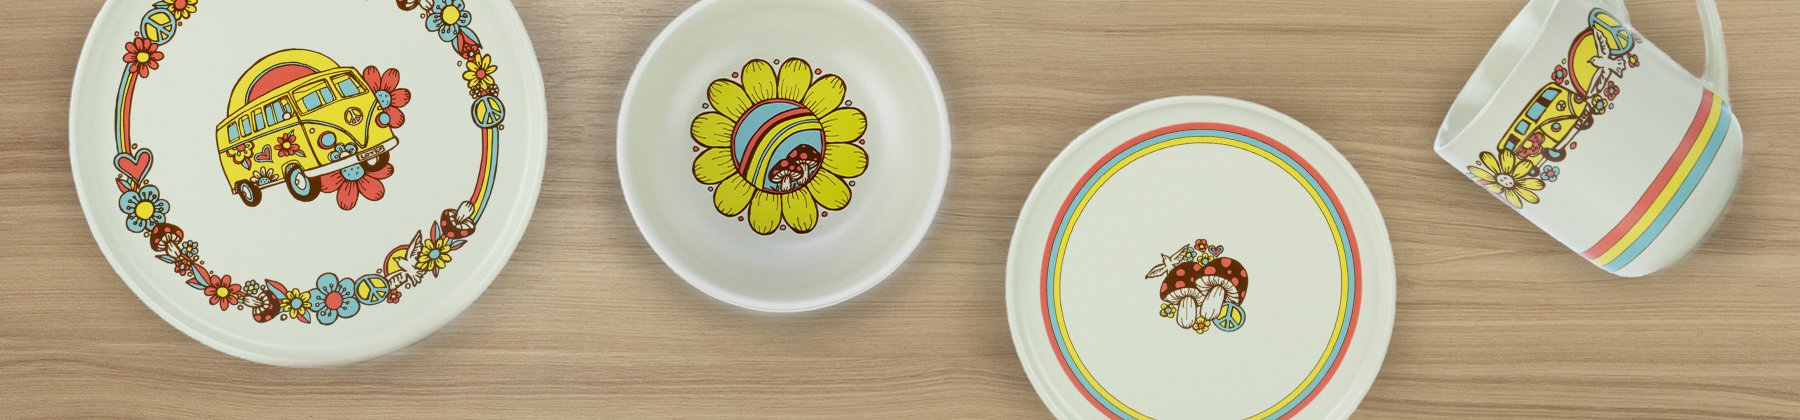 Photo of Everything Kitchens Modern Flat Peace and Love dinnerware.